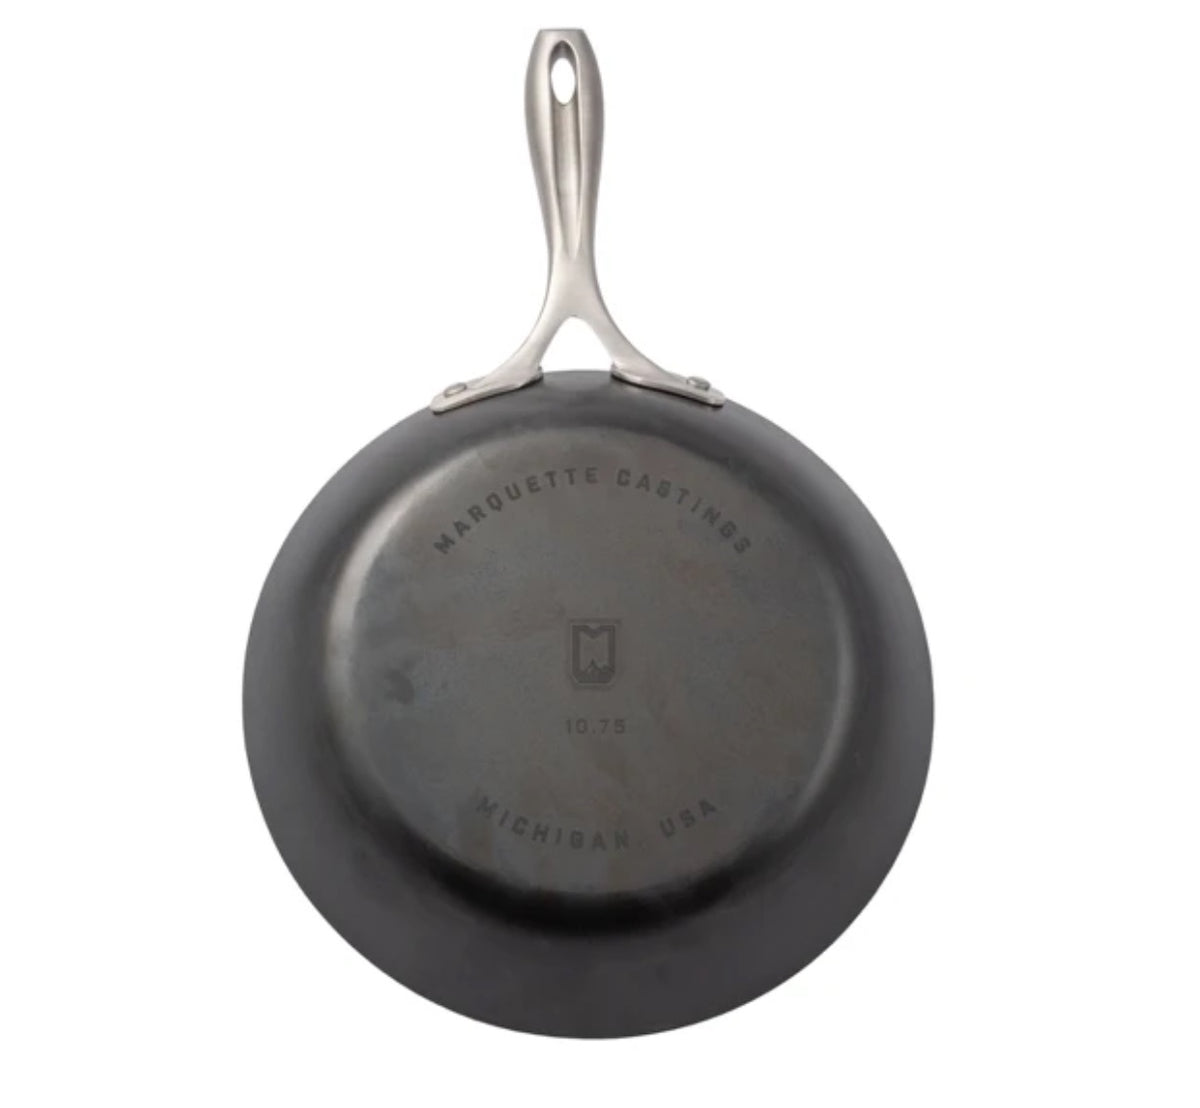 Marquette Castings Cookware